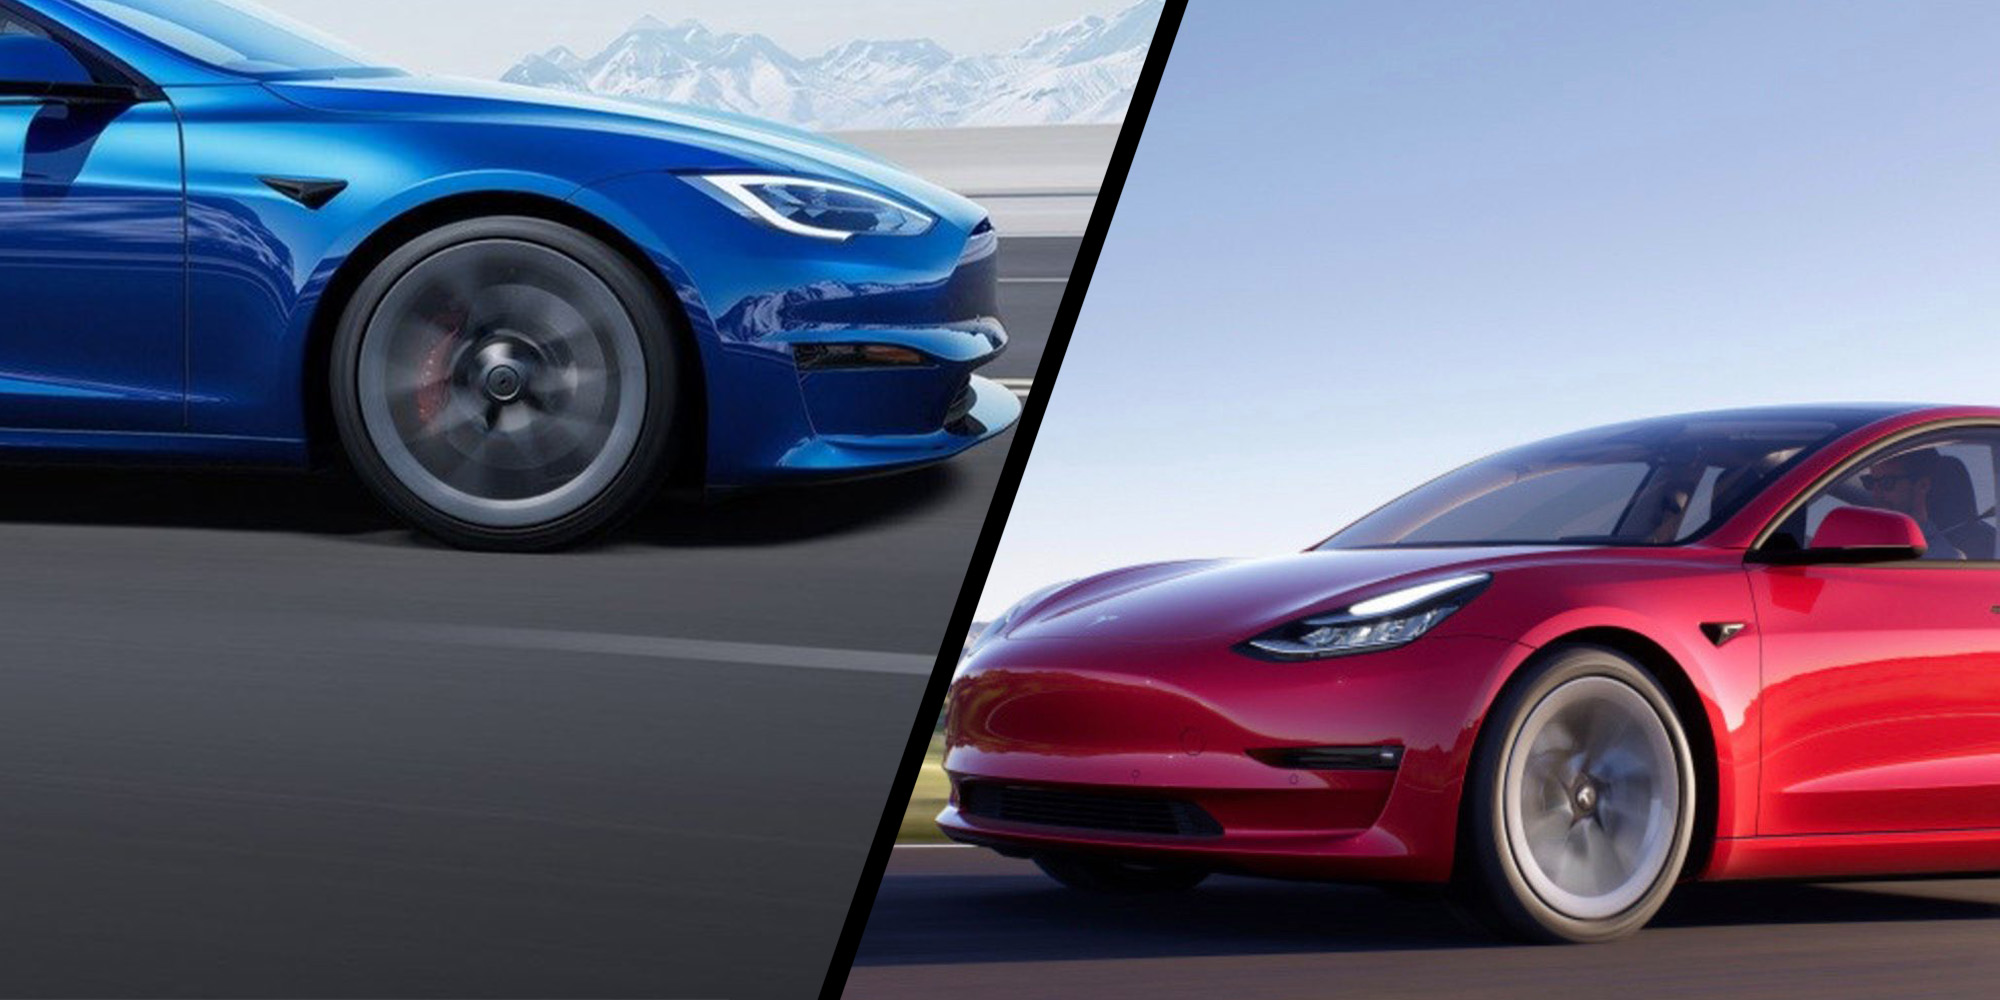 Bigger than the Model 3: How the Model Y shapes up to Tesla's electric sedan